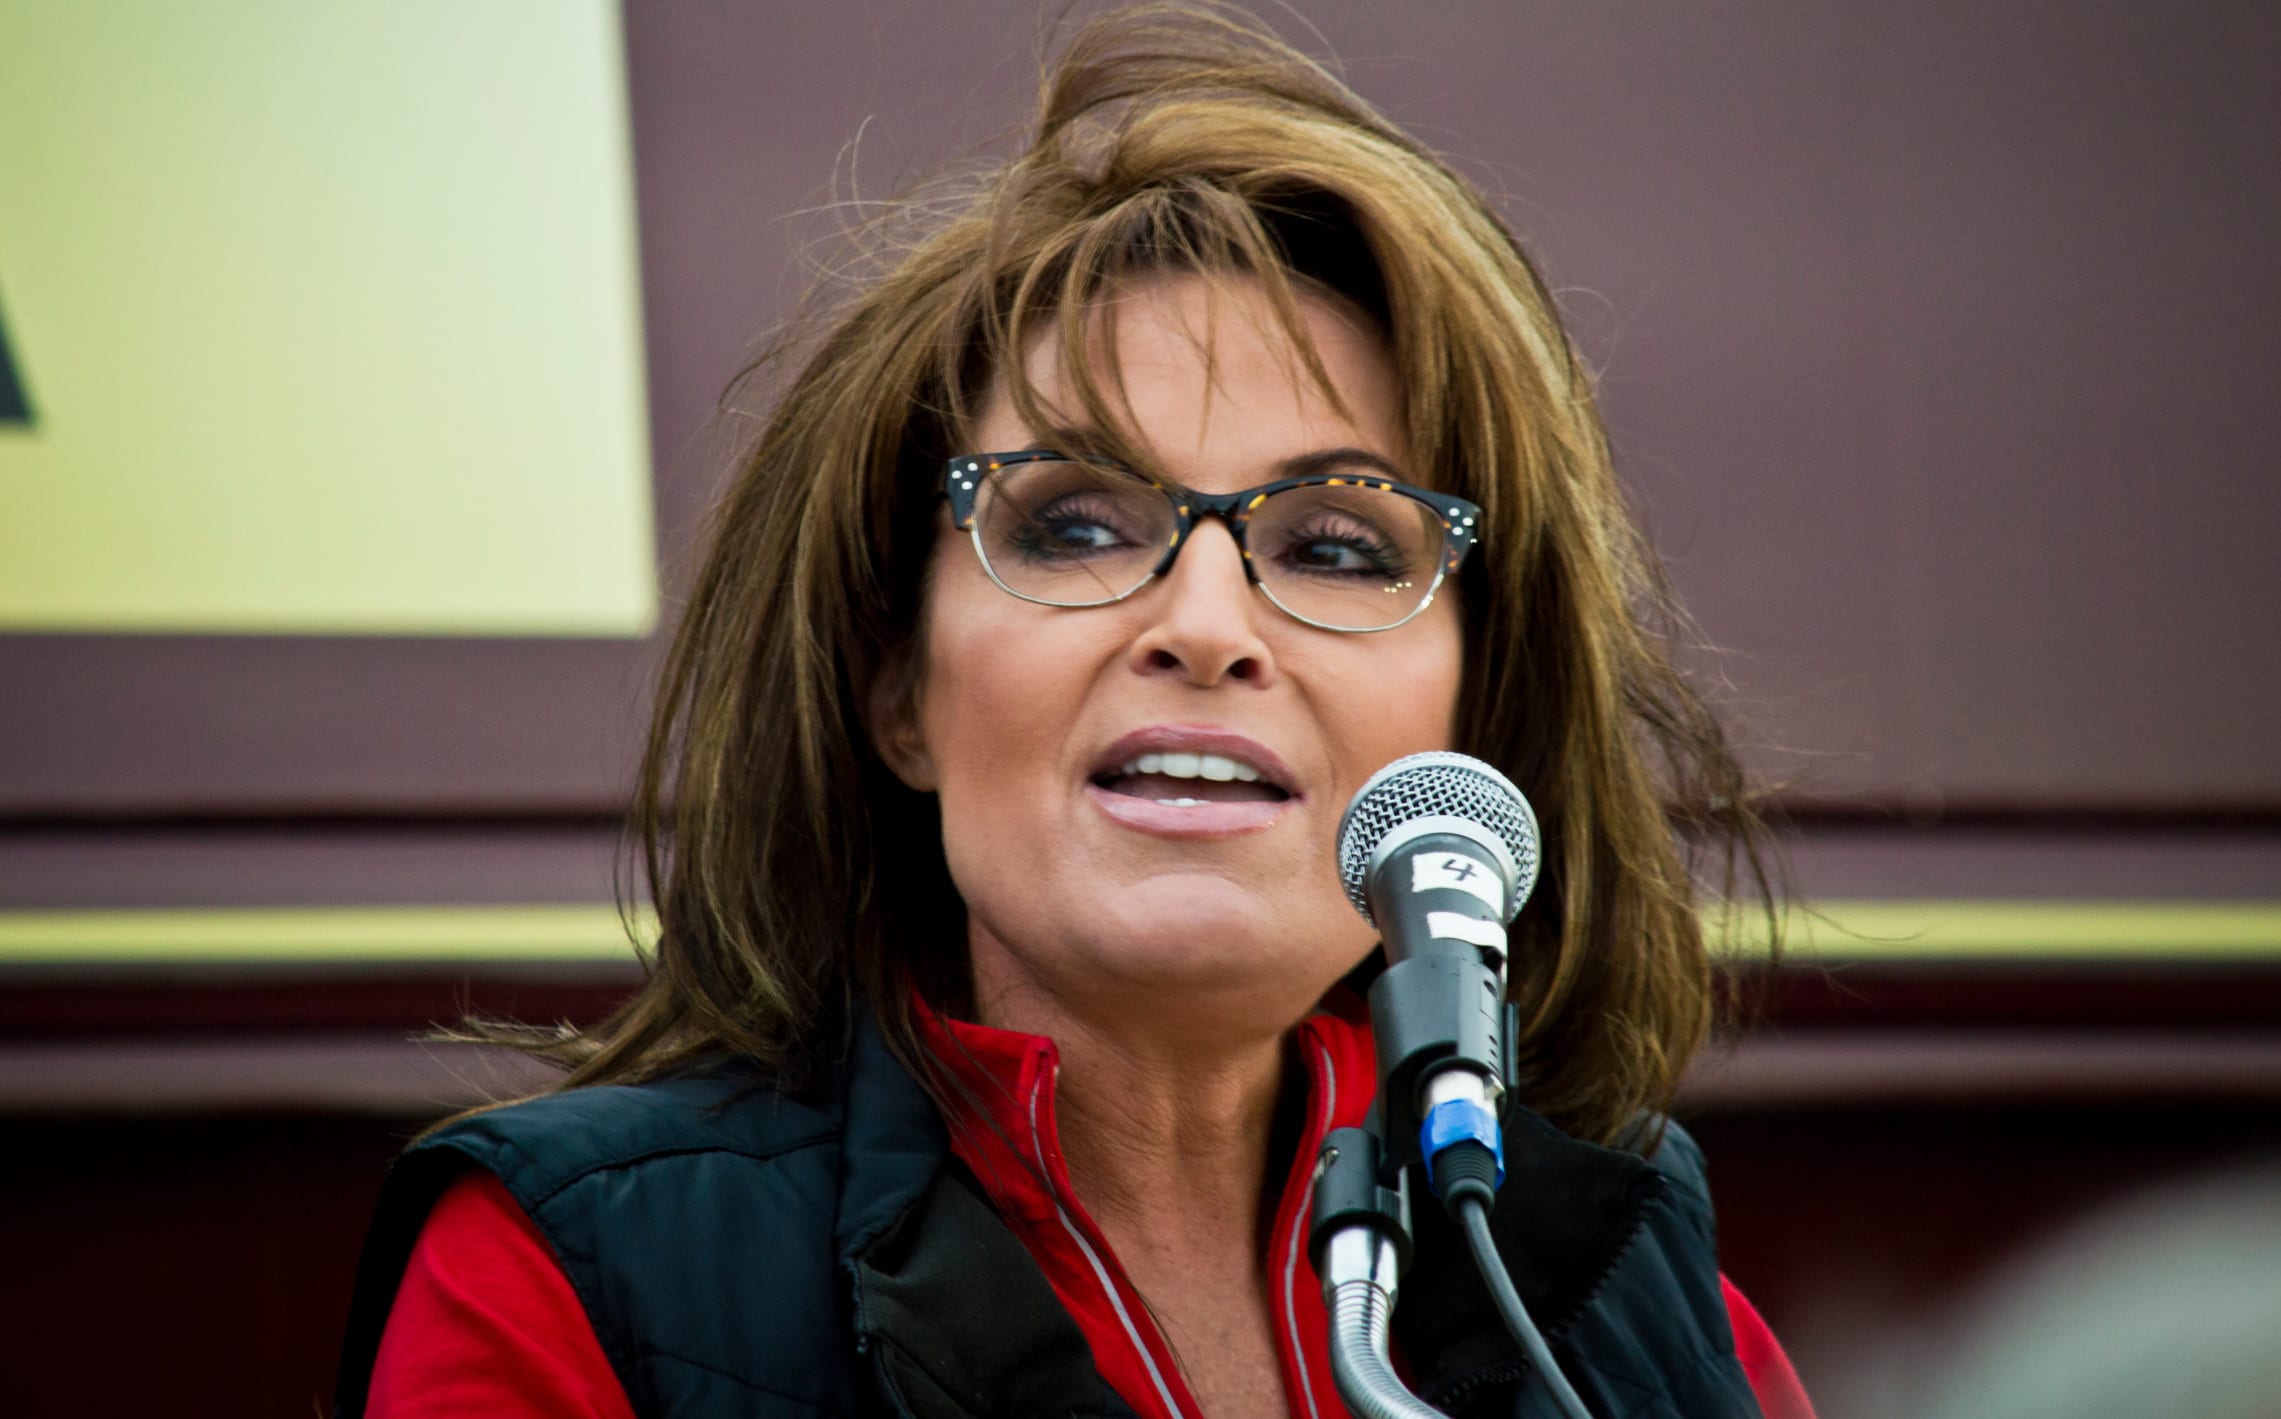 Sarah Palin has announced she will campaign for the Alaskan seat in the House.